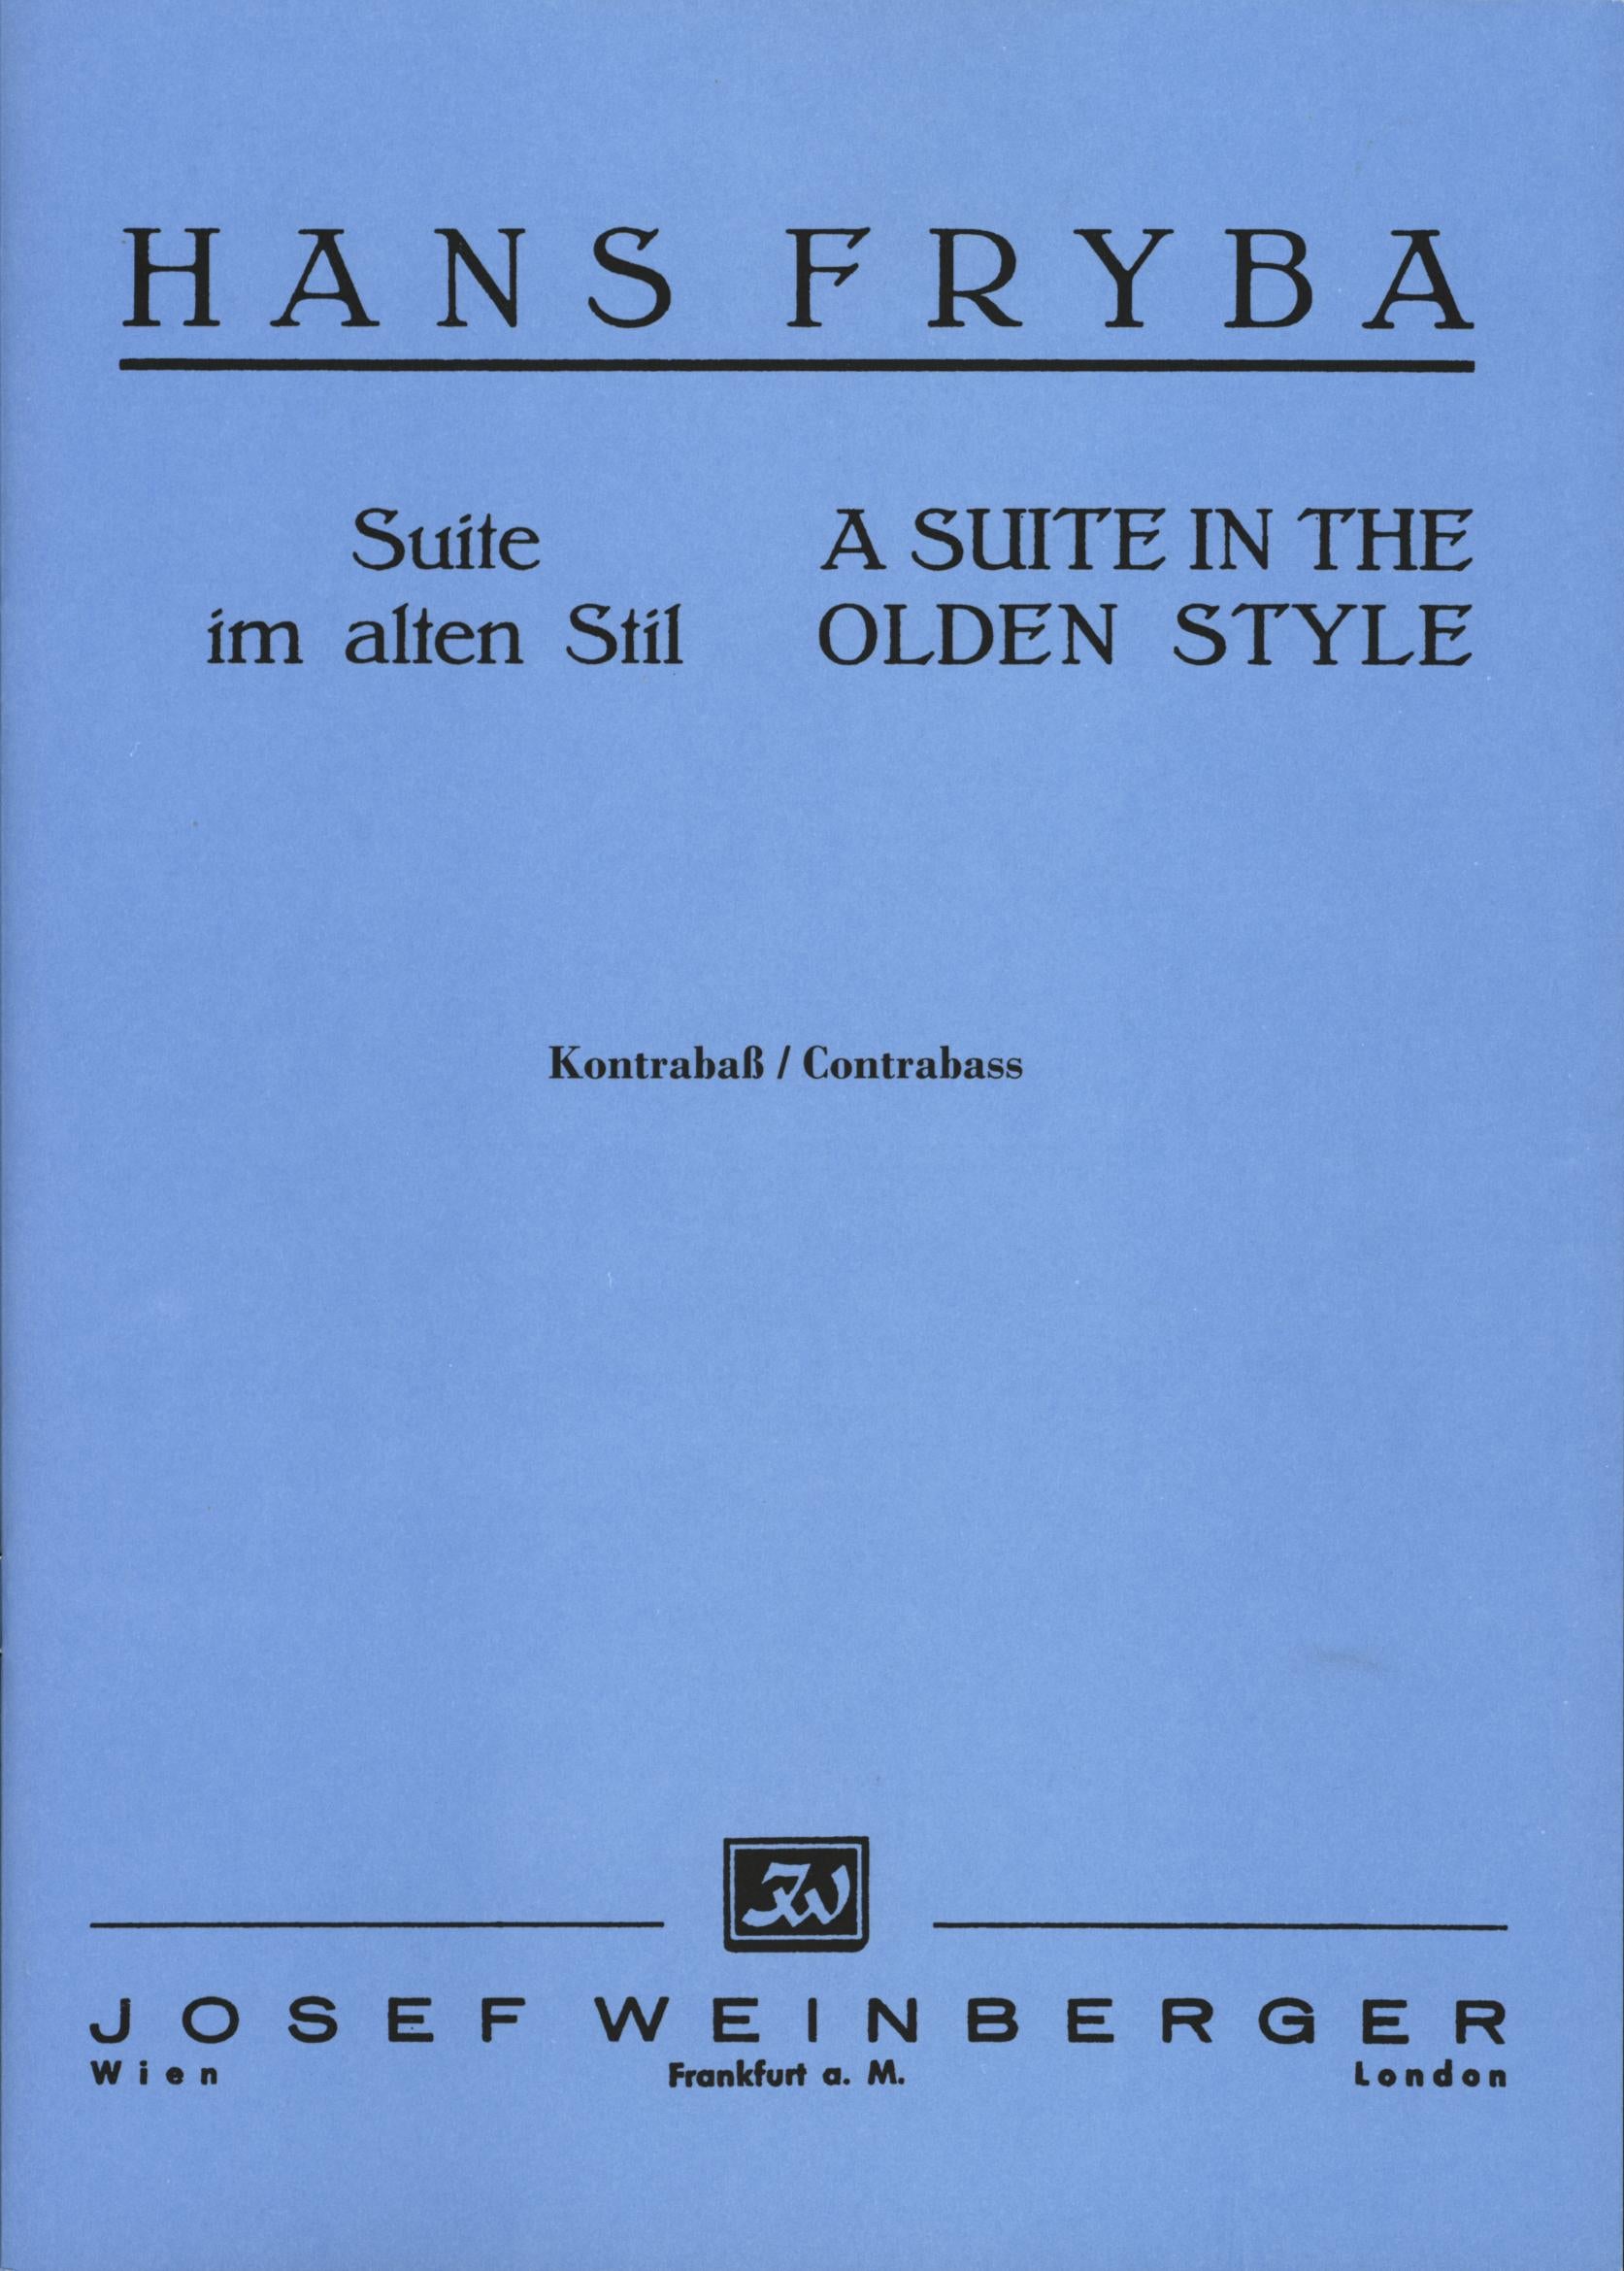 Fryba: Suite in the Olden Style